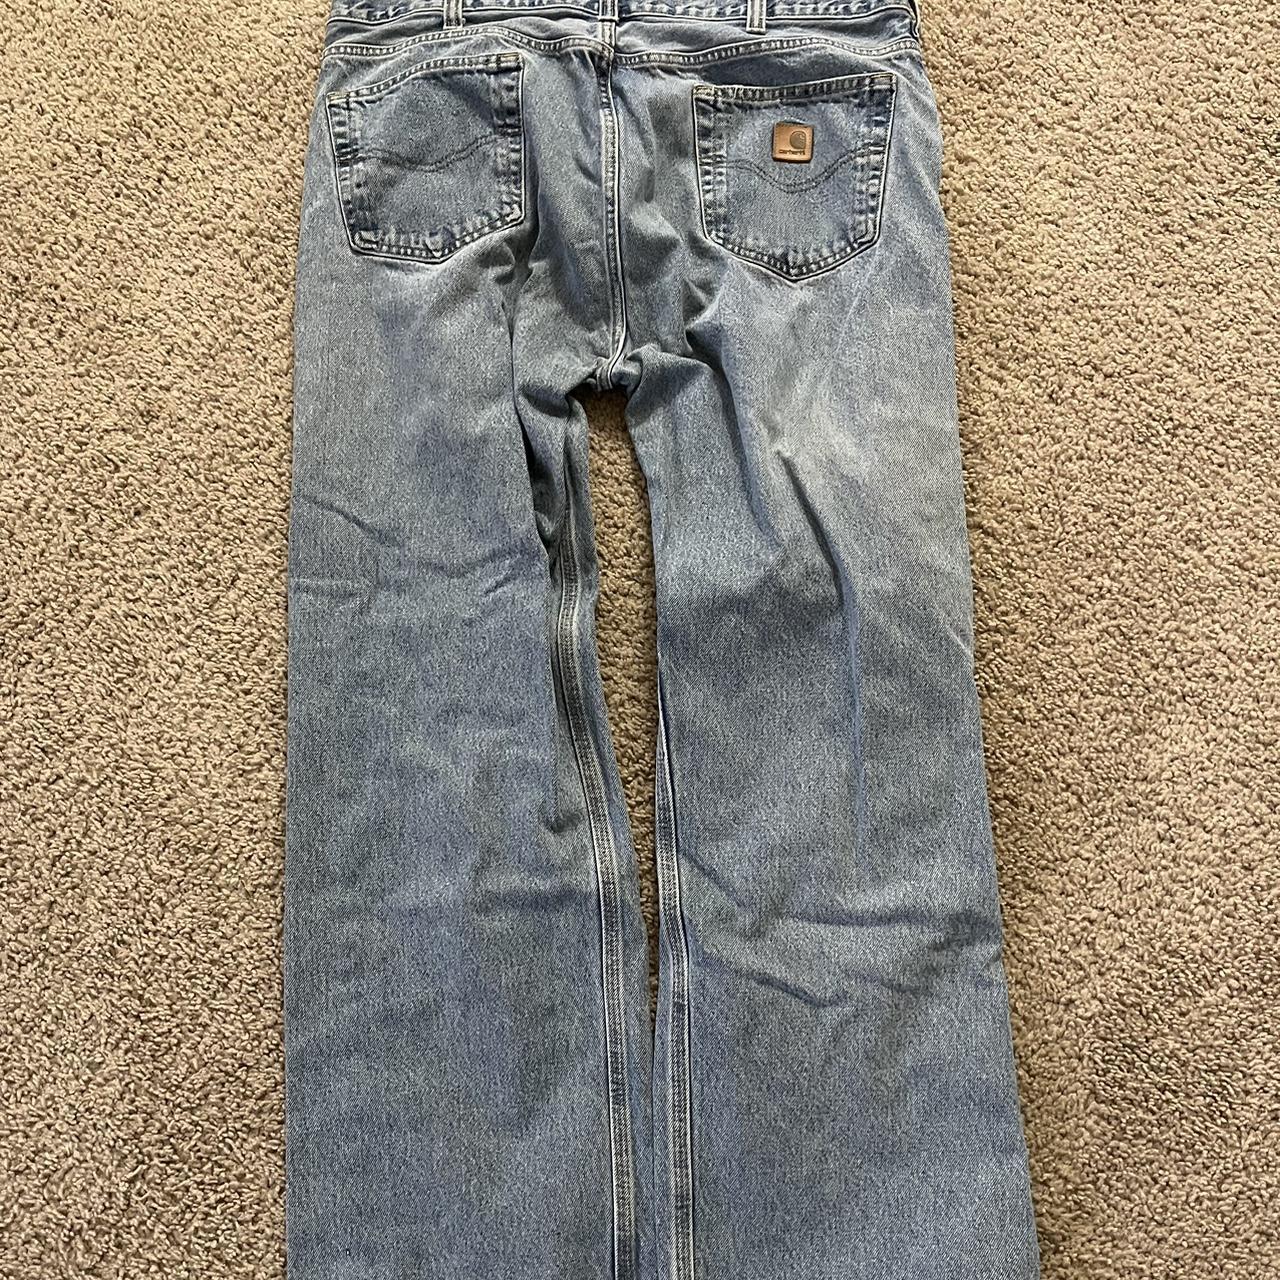 Carhartt WIP Men's Blue and Navy Jeans (4)